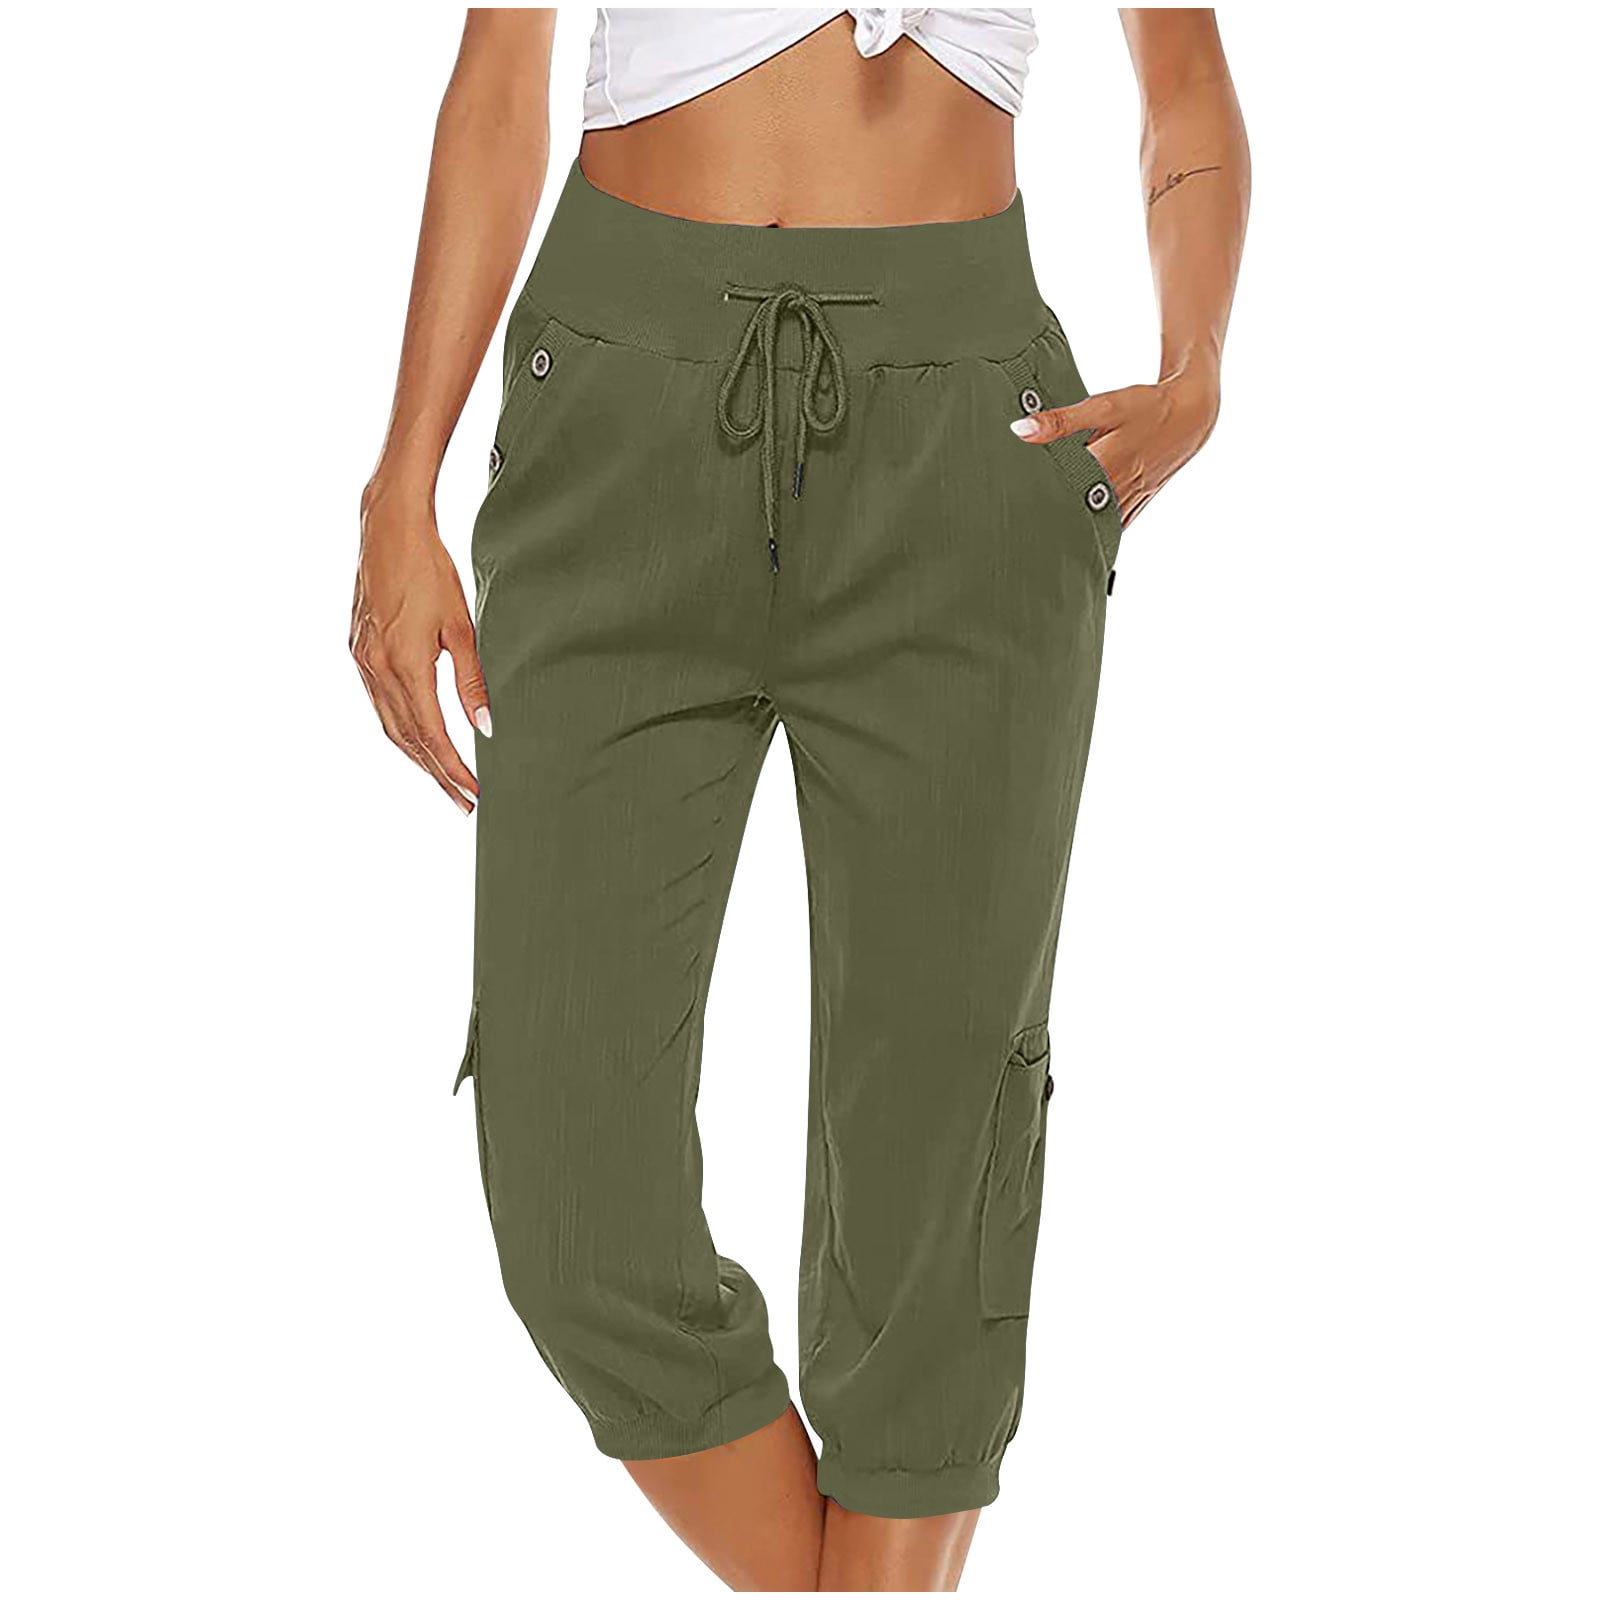 Hfyihgf Womens Linen Capri with 4 Pockets Loose Fit Casual Cropped Pants  Dressy Lightweight Plus Size Ladies Baggy Cargo Pants for Hiking(Army